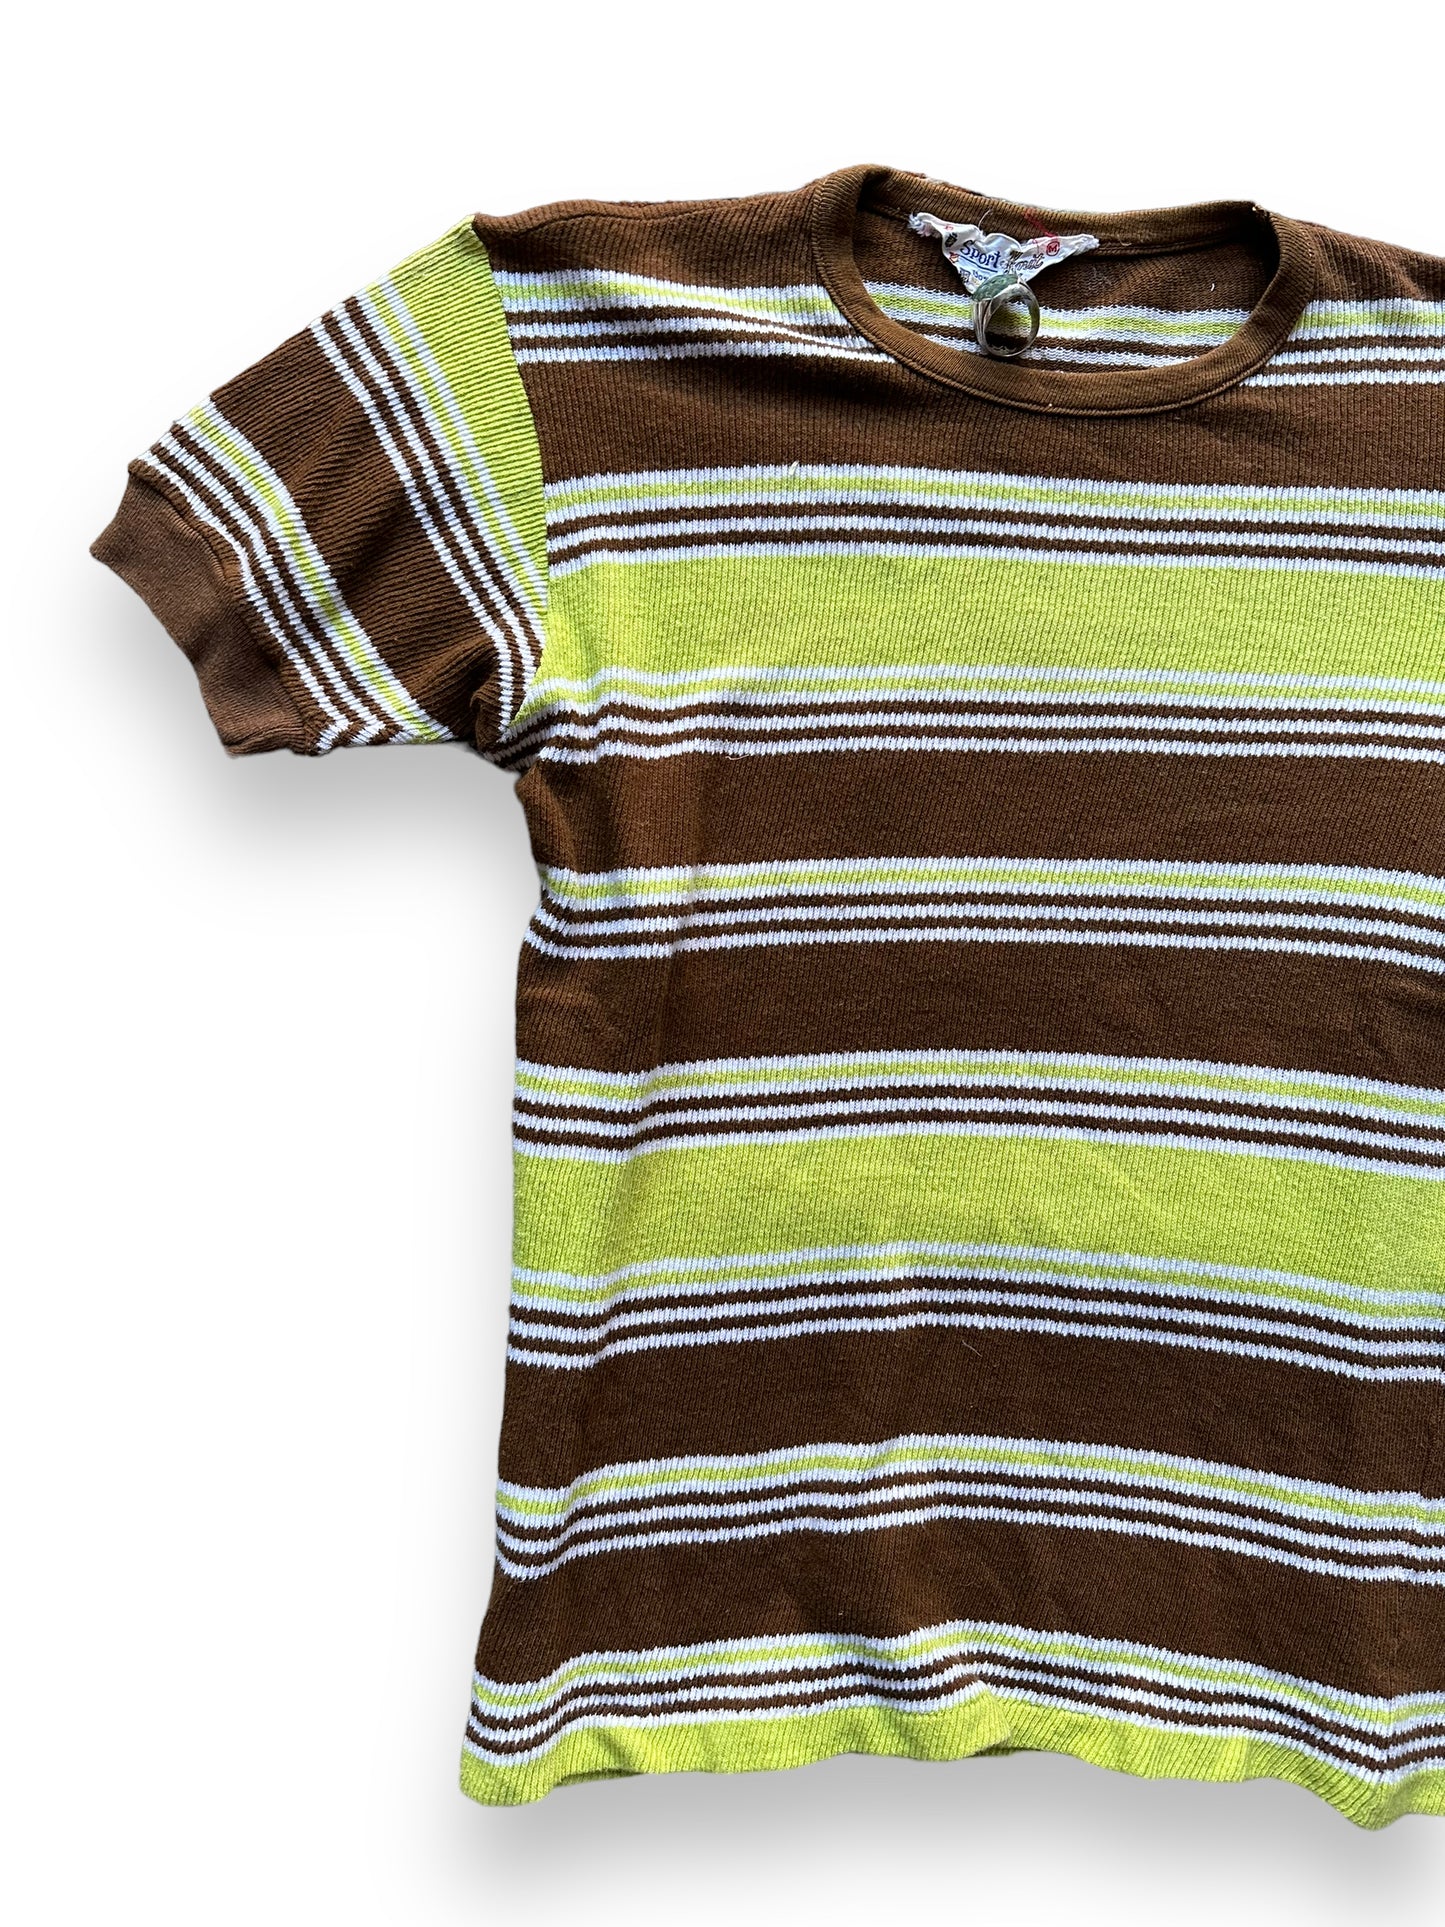 Front Right View of Vintage Sears Sport Knit Striped Cotton Top SZ M | Vintage Striped Shirts Seattle | Barn Owl Vintage Tees Seattle